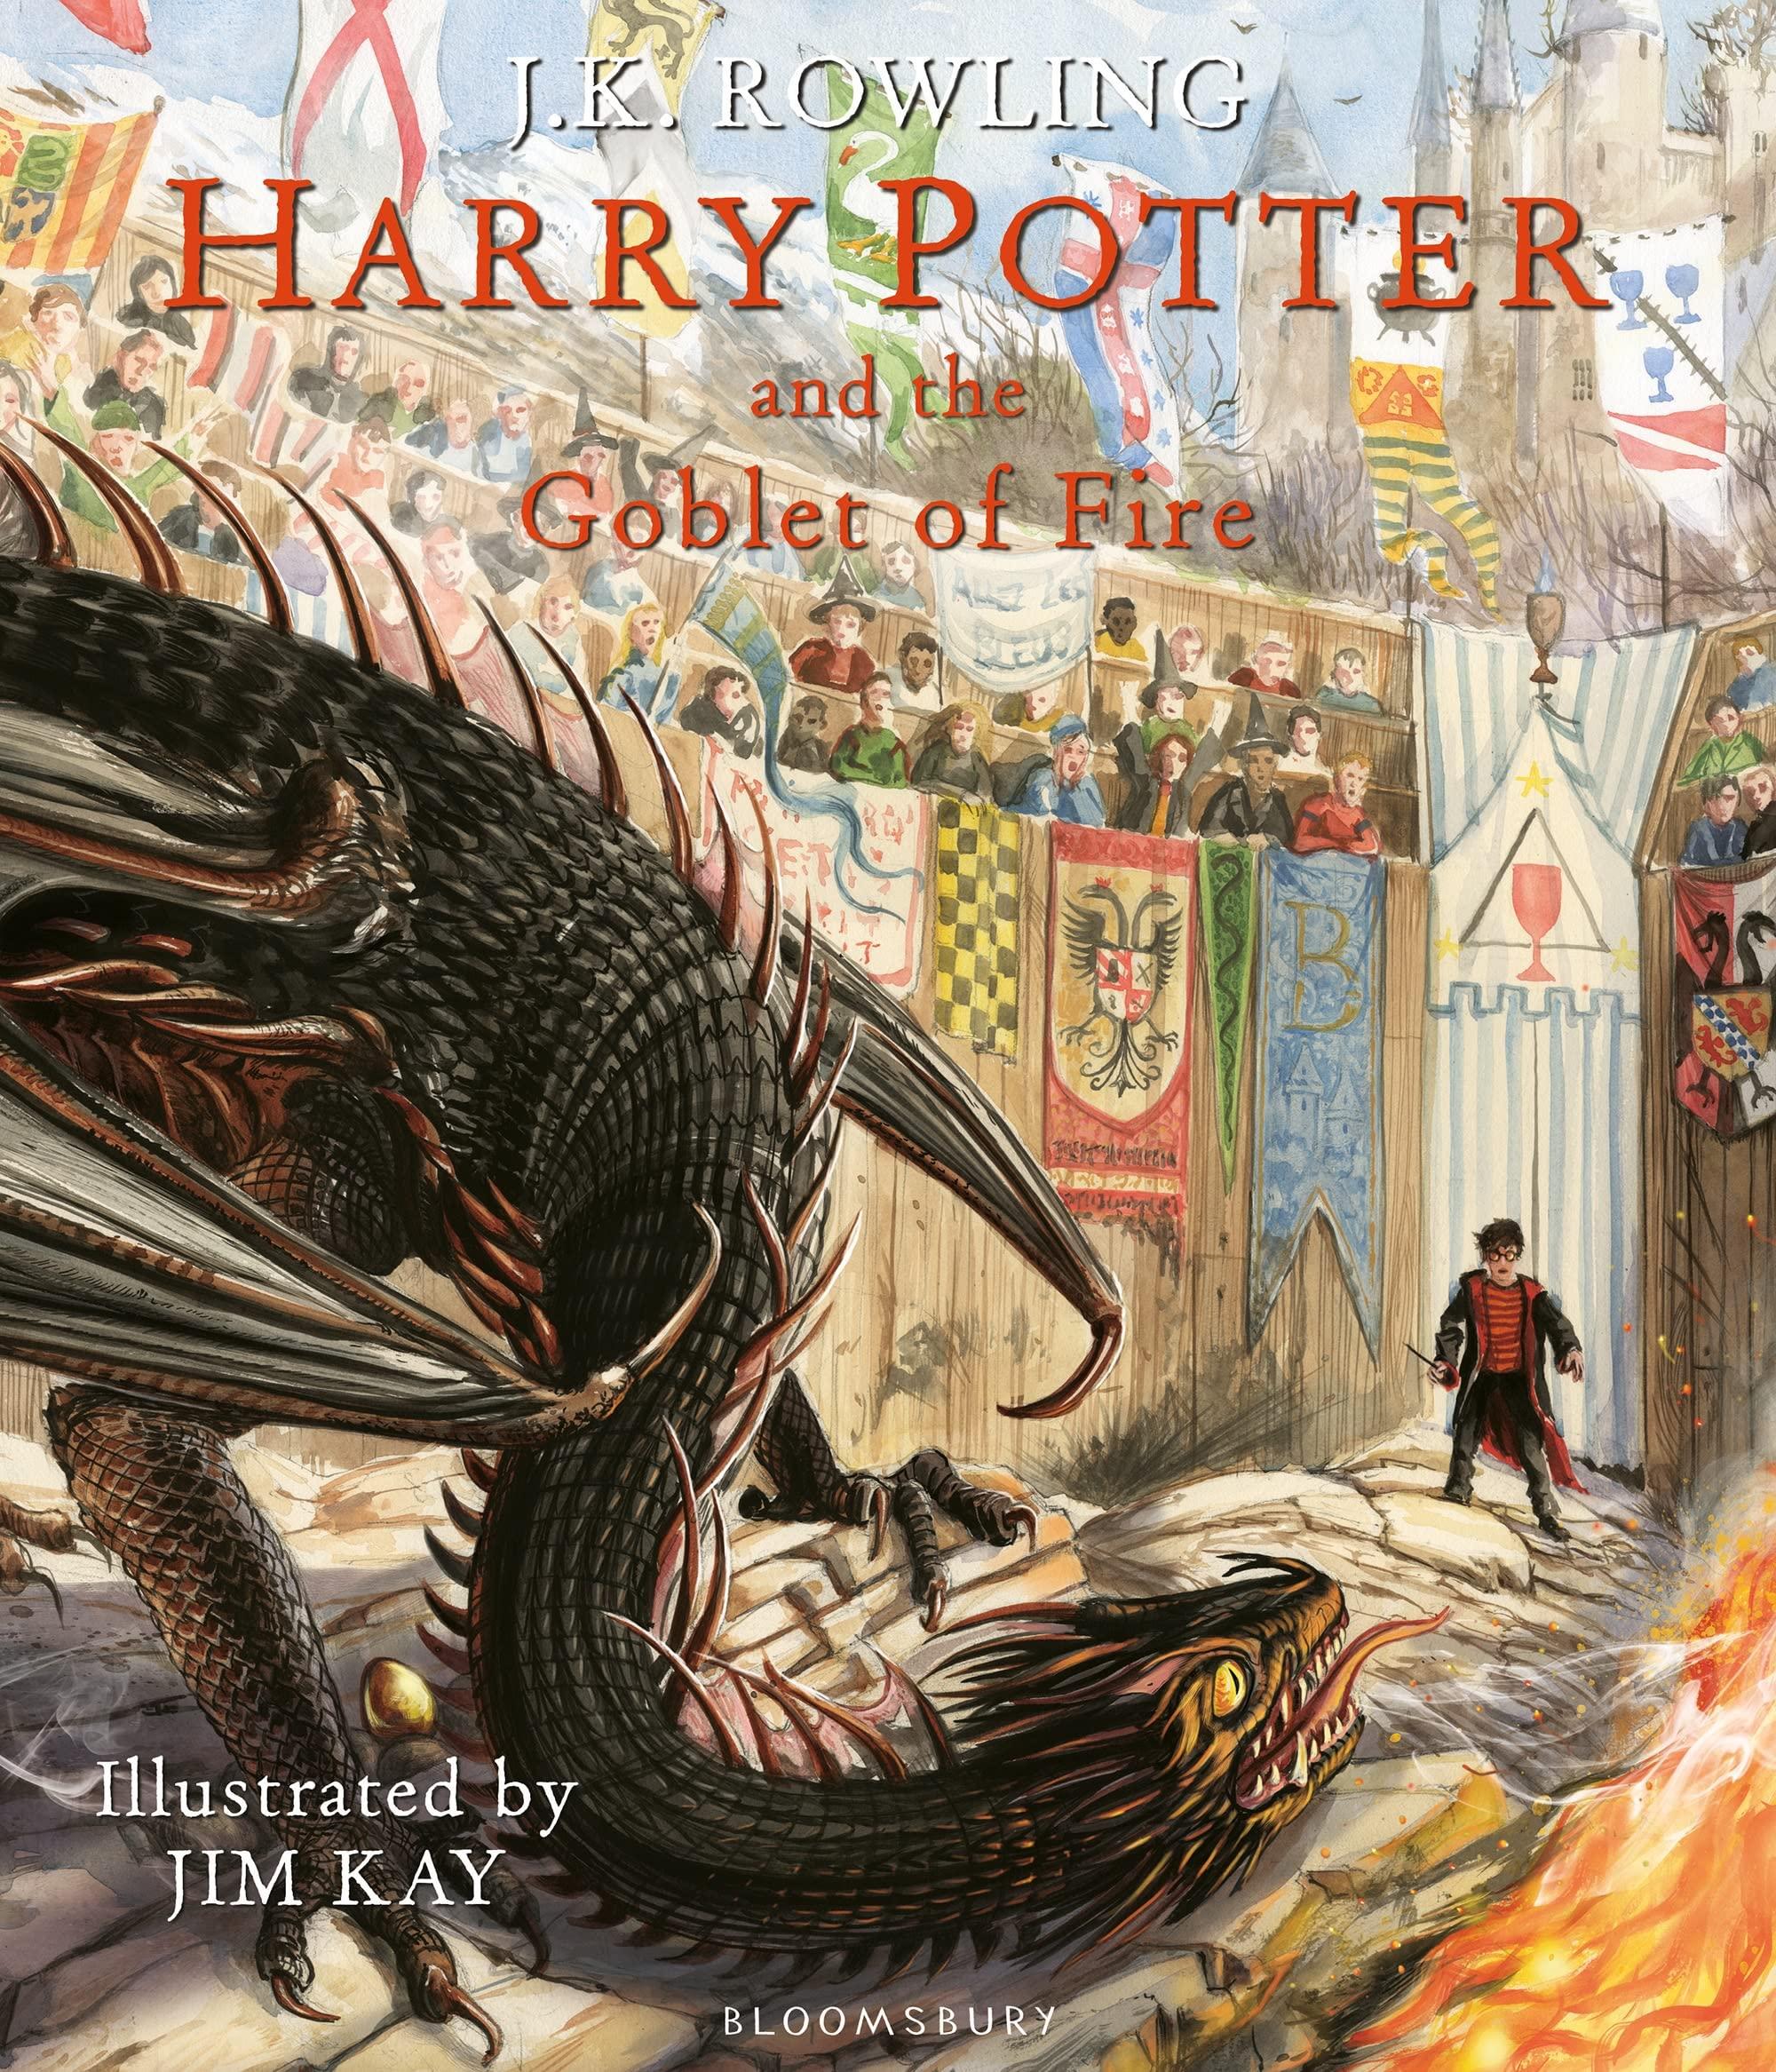 A Guide to the Characters of 'Harry Potter and the Goblet of Fire' in Chronological Order